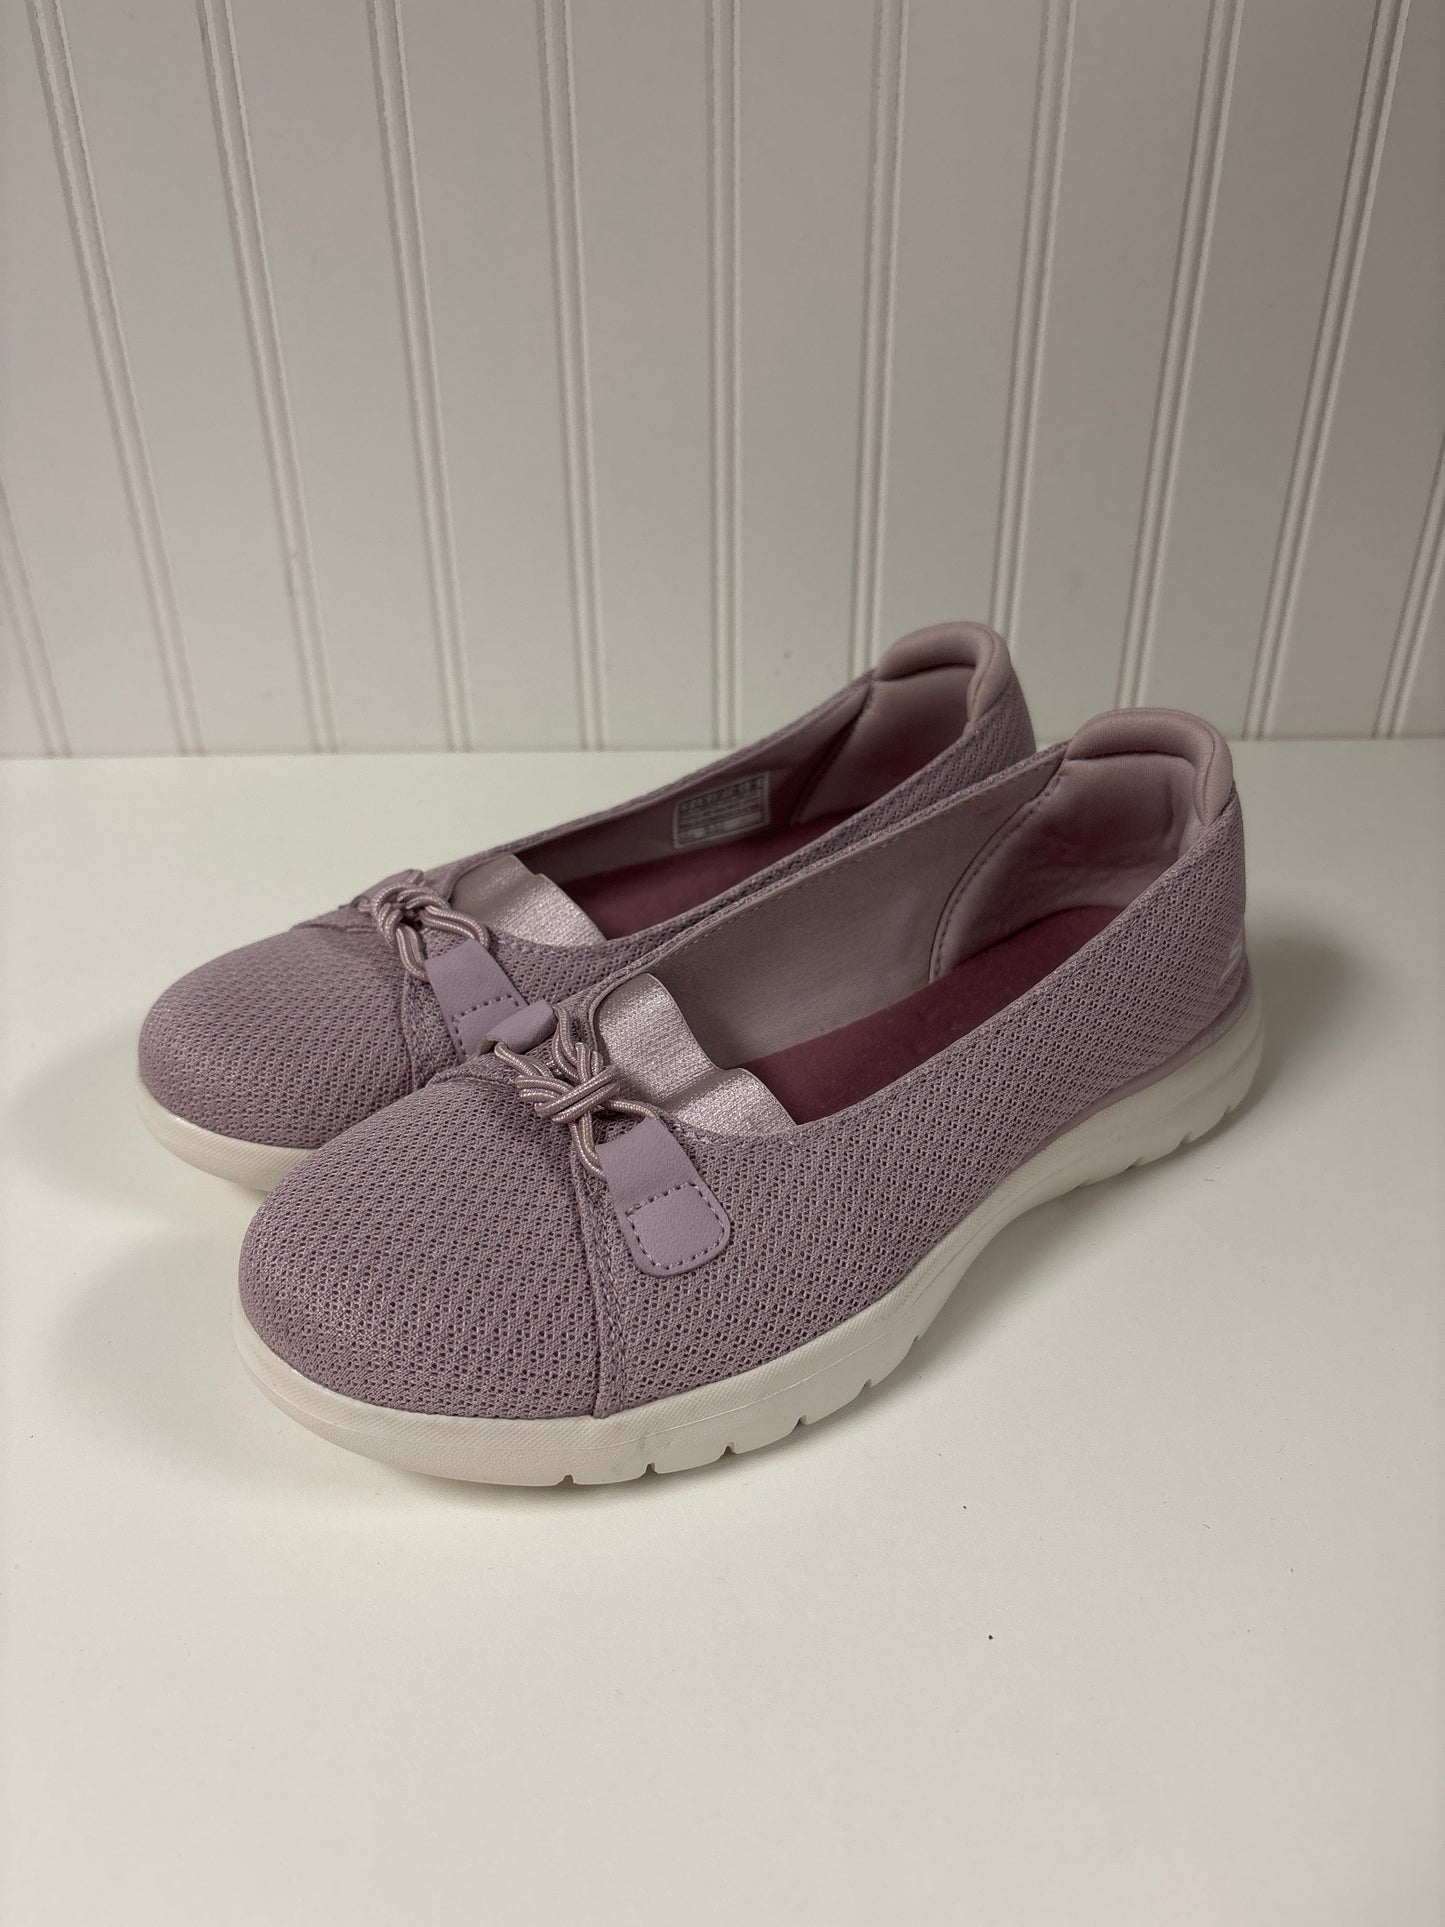 Pink Shoes Flats Skechers, Size 7